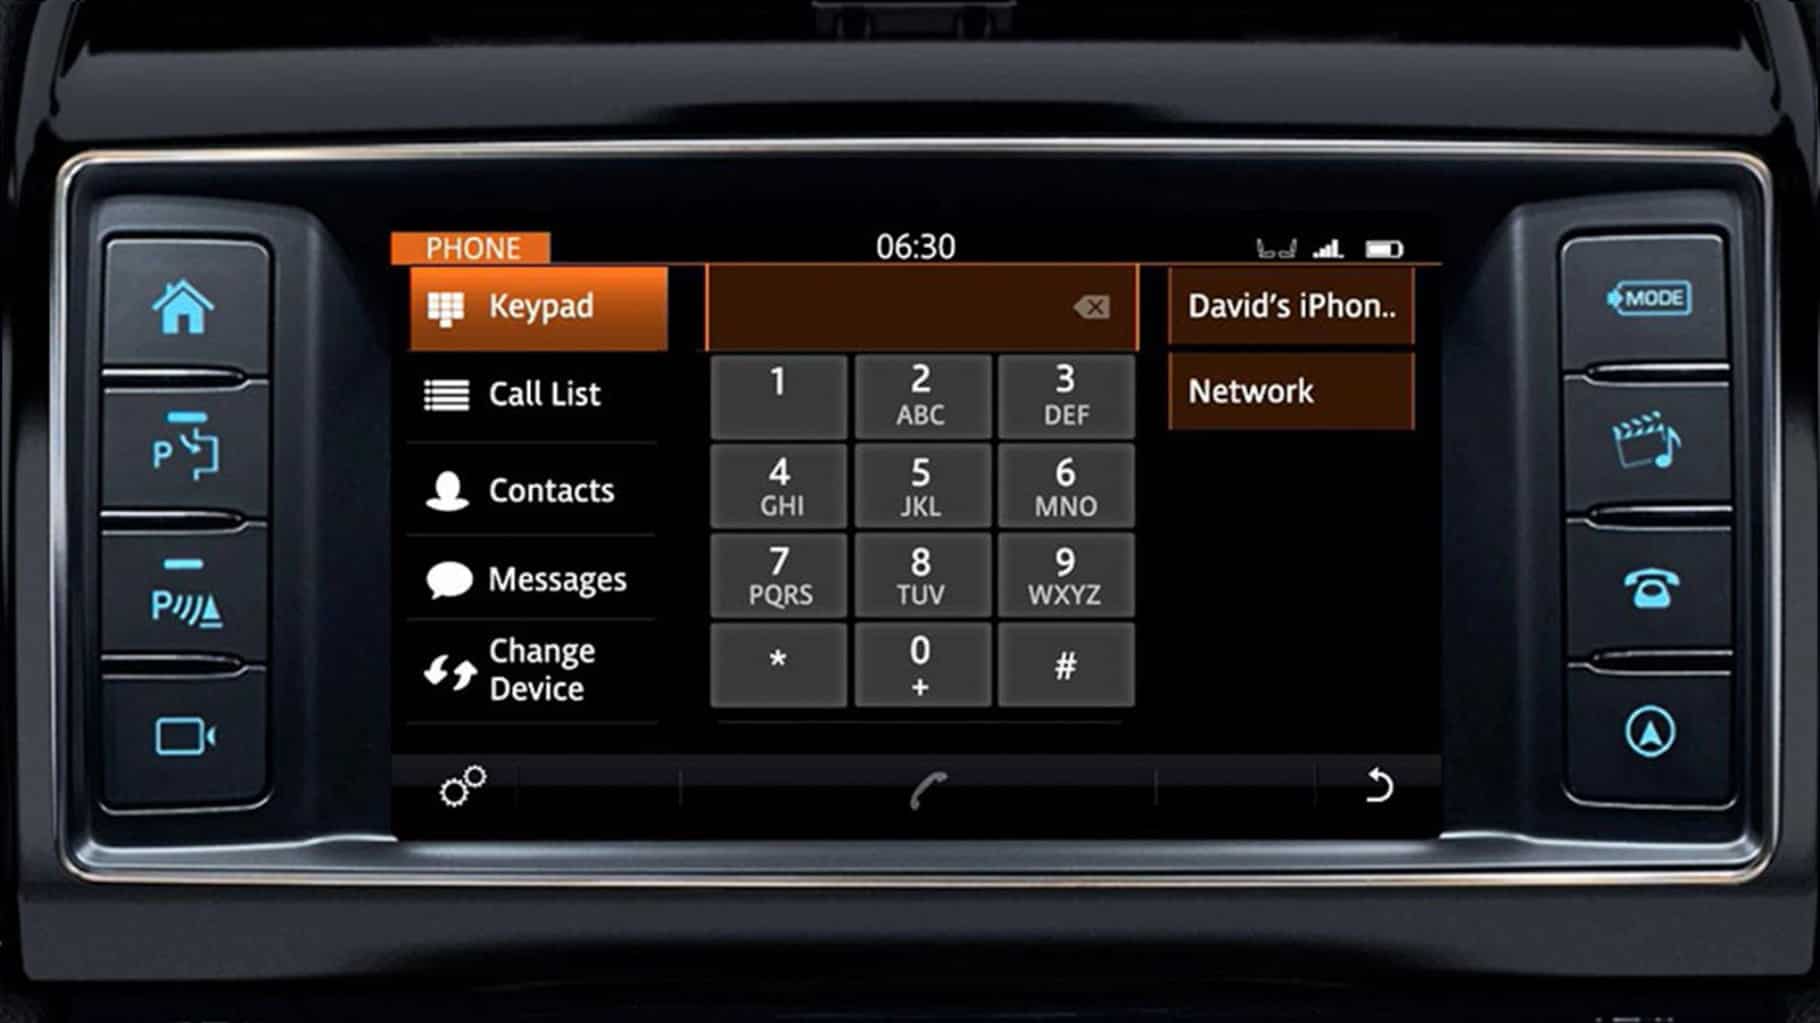 Jaguar F-PACE's InControl Touch: Bluetooth Phone Operation information video.